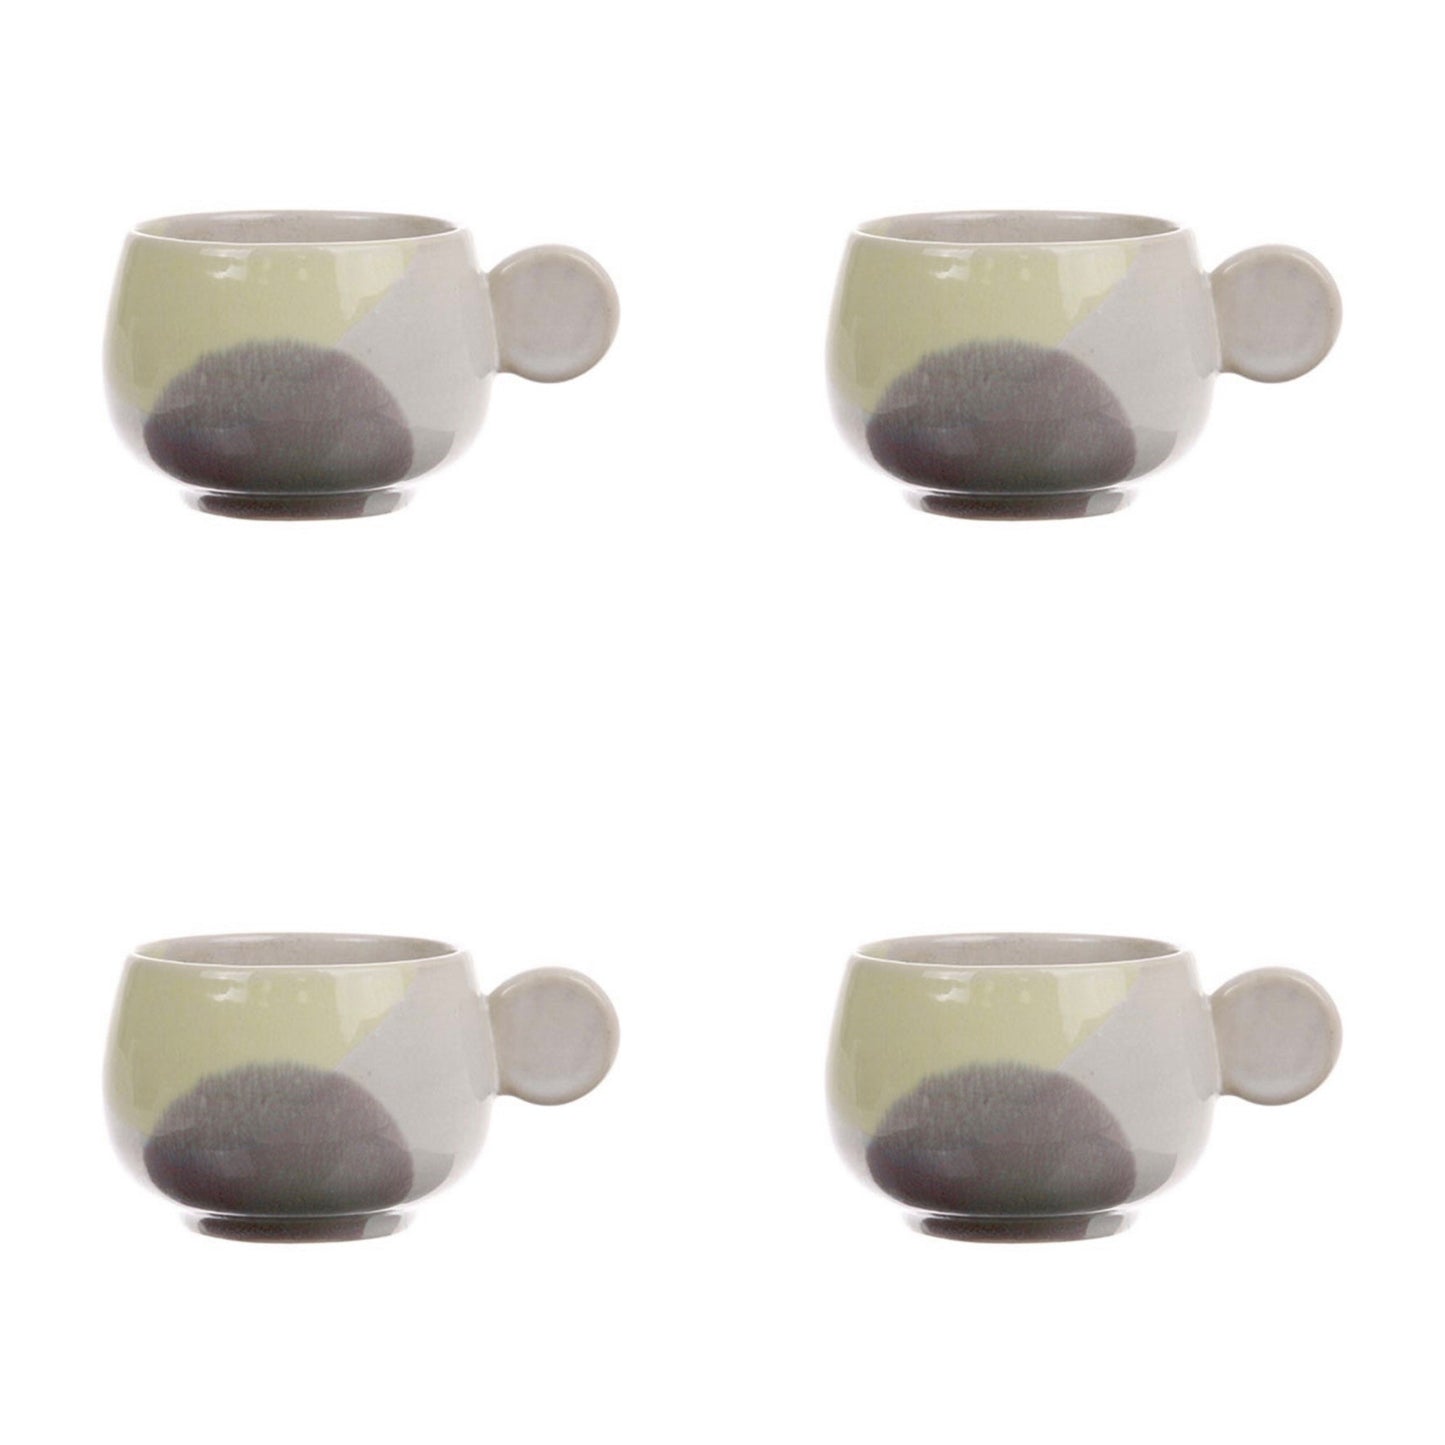 4 stoneware coffee cups with ear in yellow and lilac pastel colors